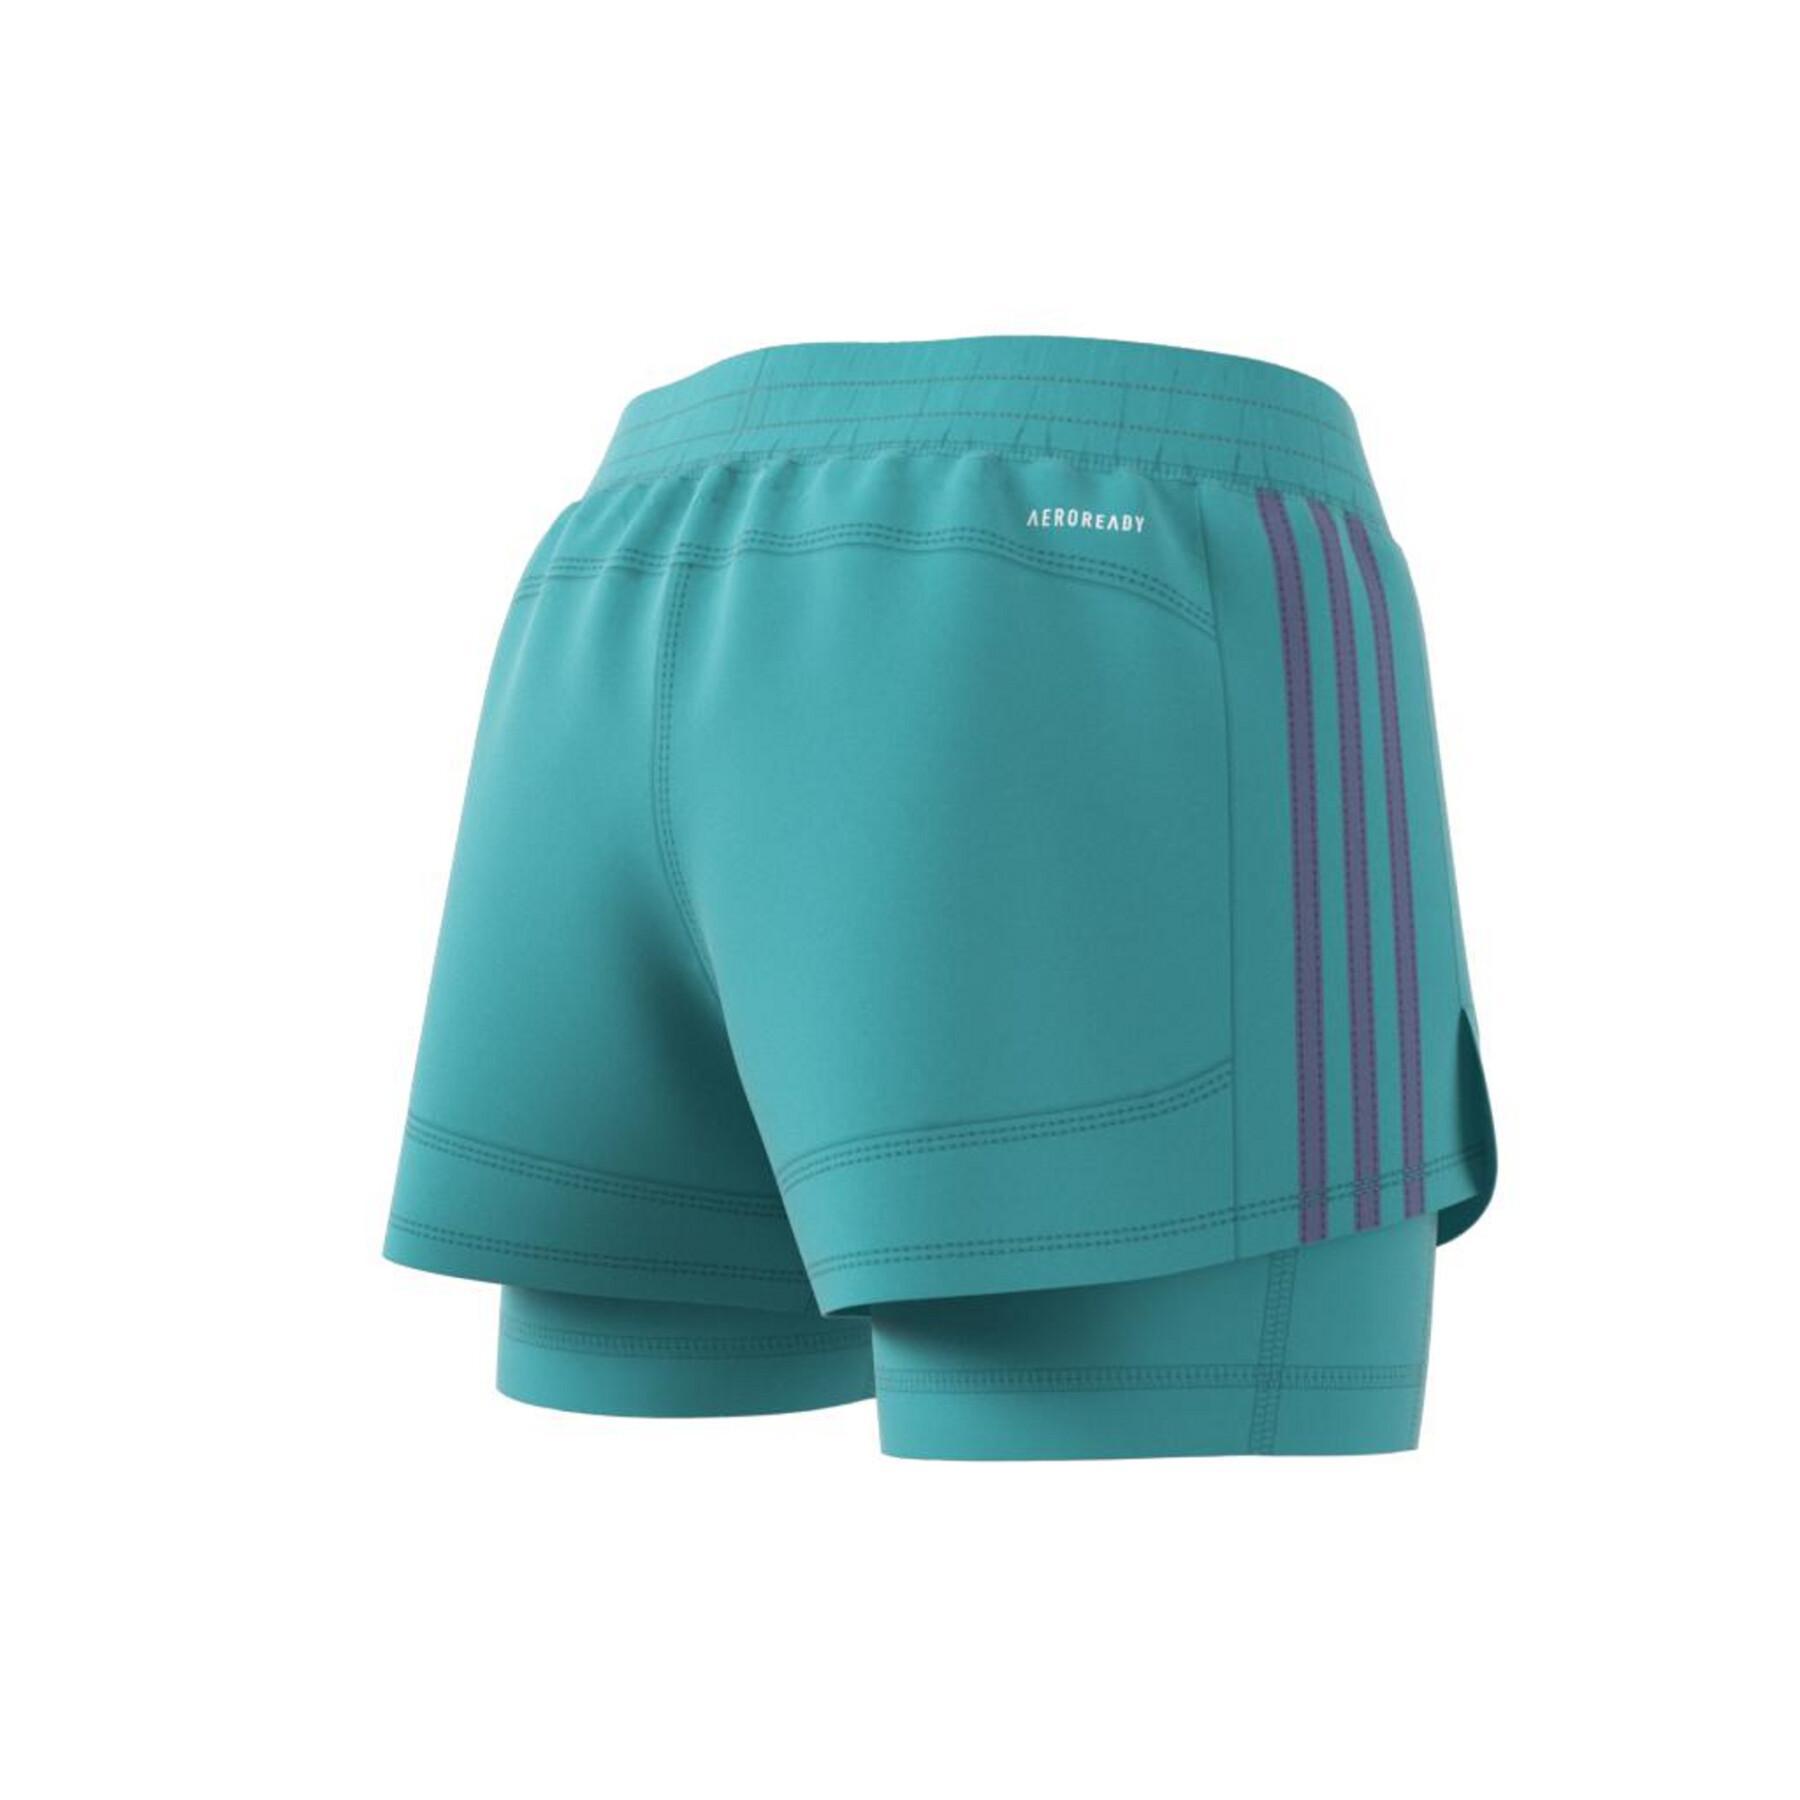 Women's shorts adidas Pacer Woven Two-In-One